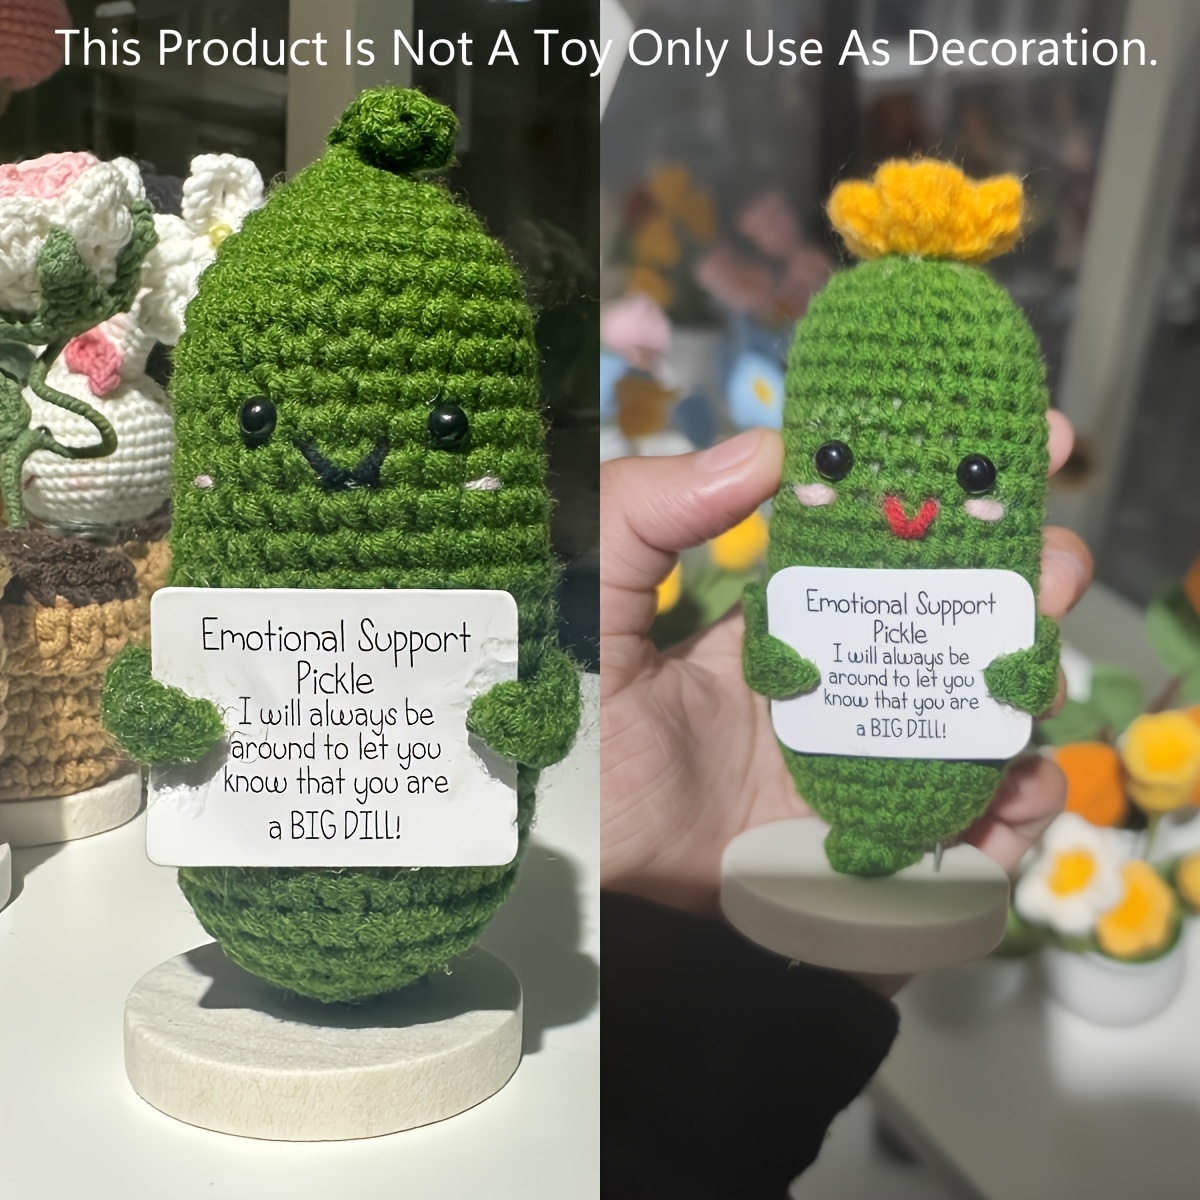 Handmade Emotional Support Pickled Cucumber Gifts, Crochet